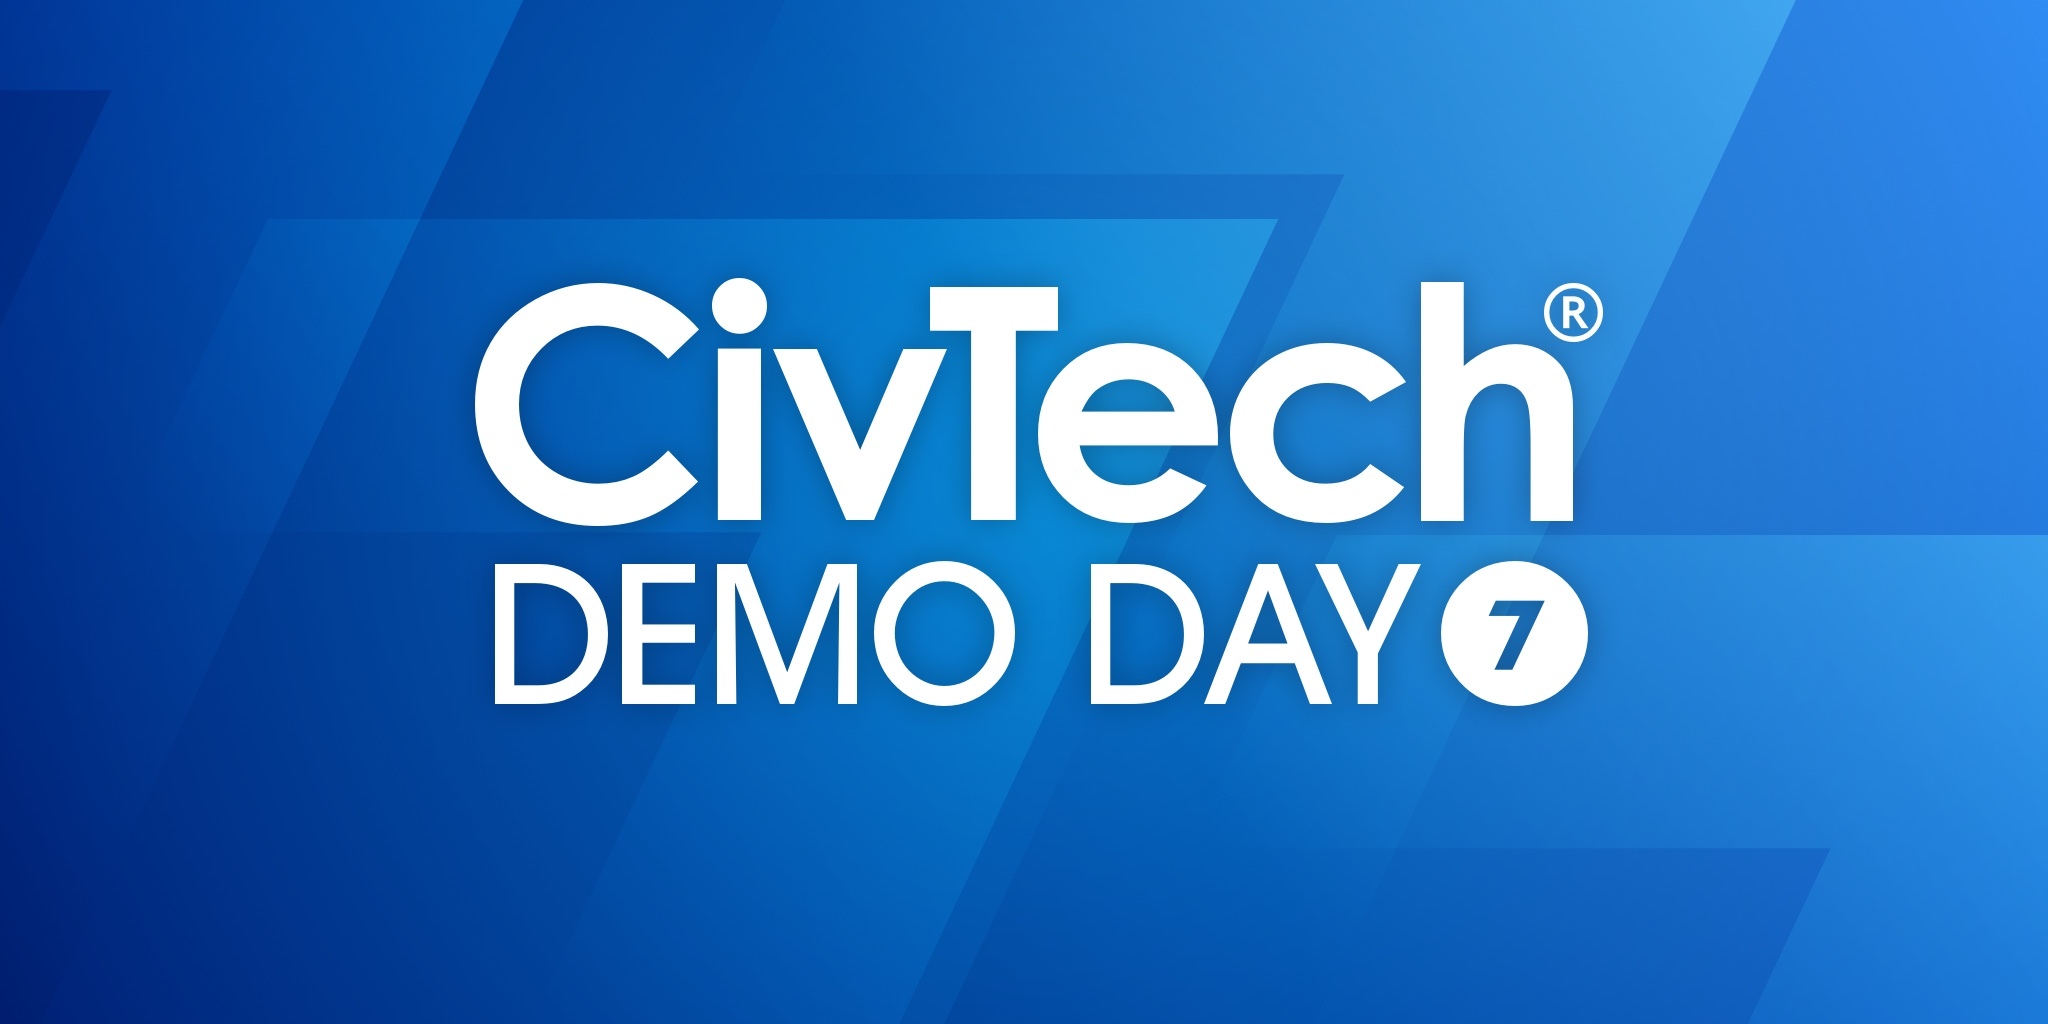 £10 million in funding for 2023 CivTech challenges